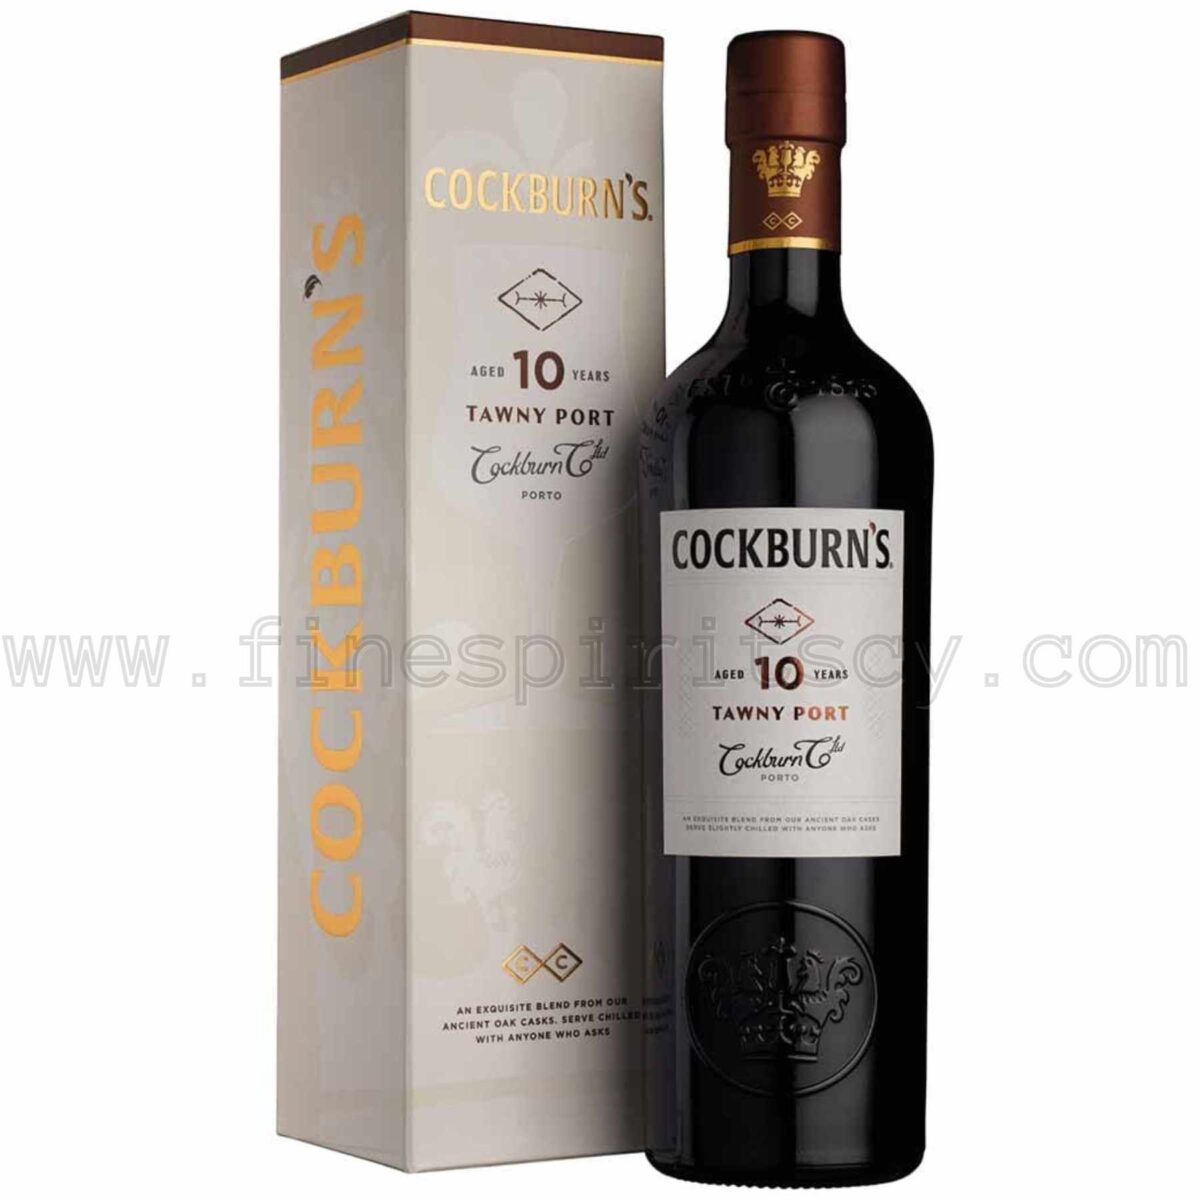 Cockburns 10 Year Old Tawny Port 750ml 75cl 0.75l with box